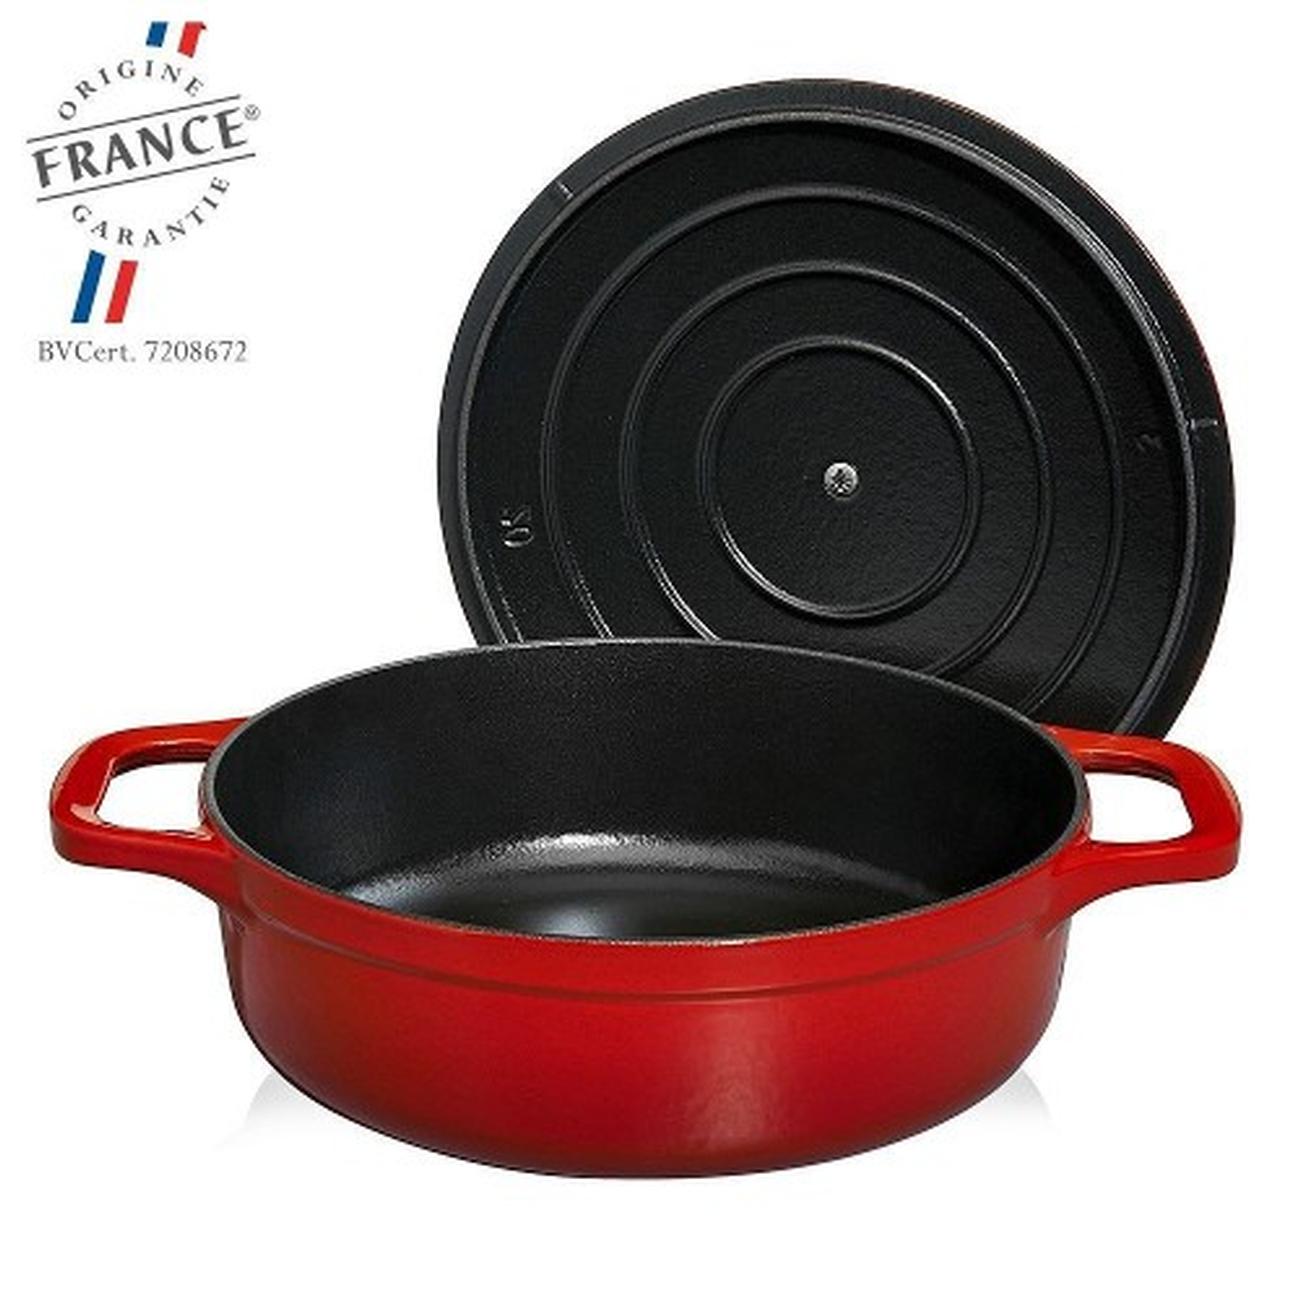 Chasseur Cast Iron Round Casserole, Ruby Red